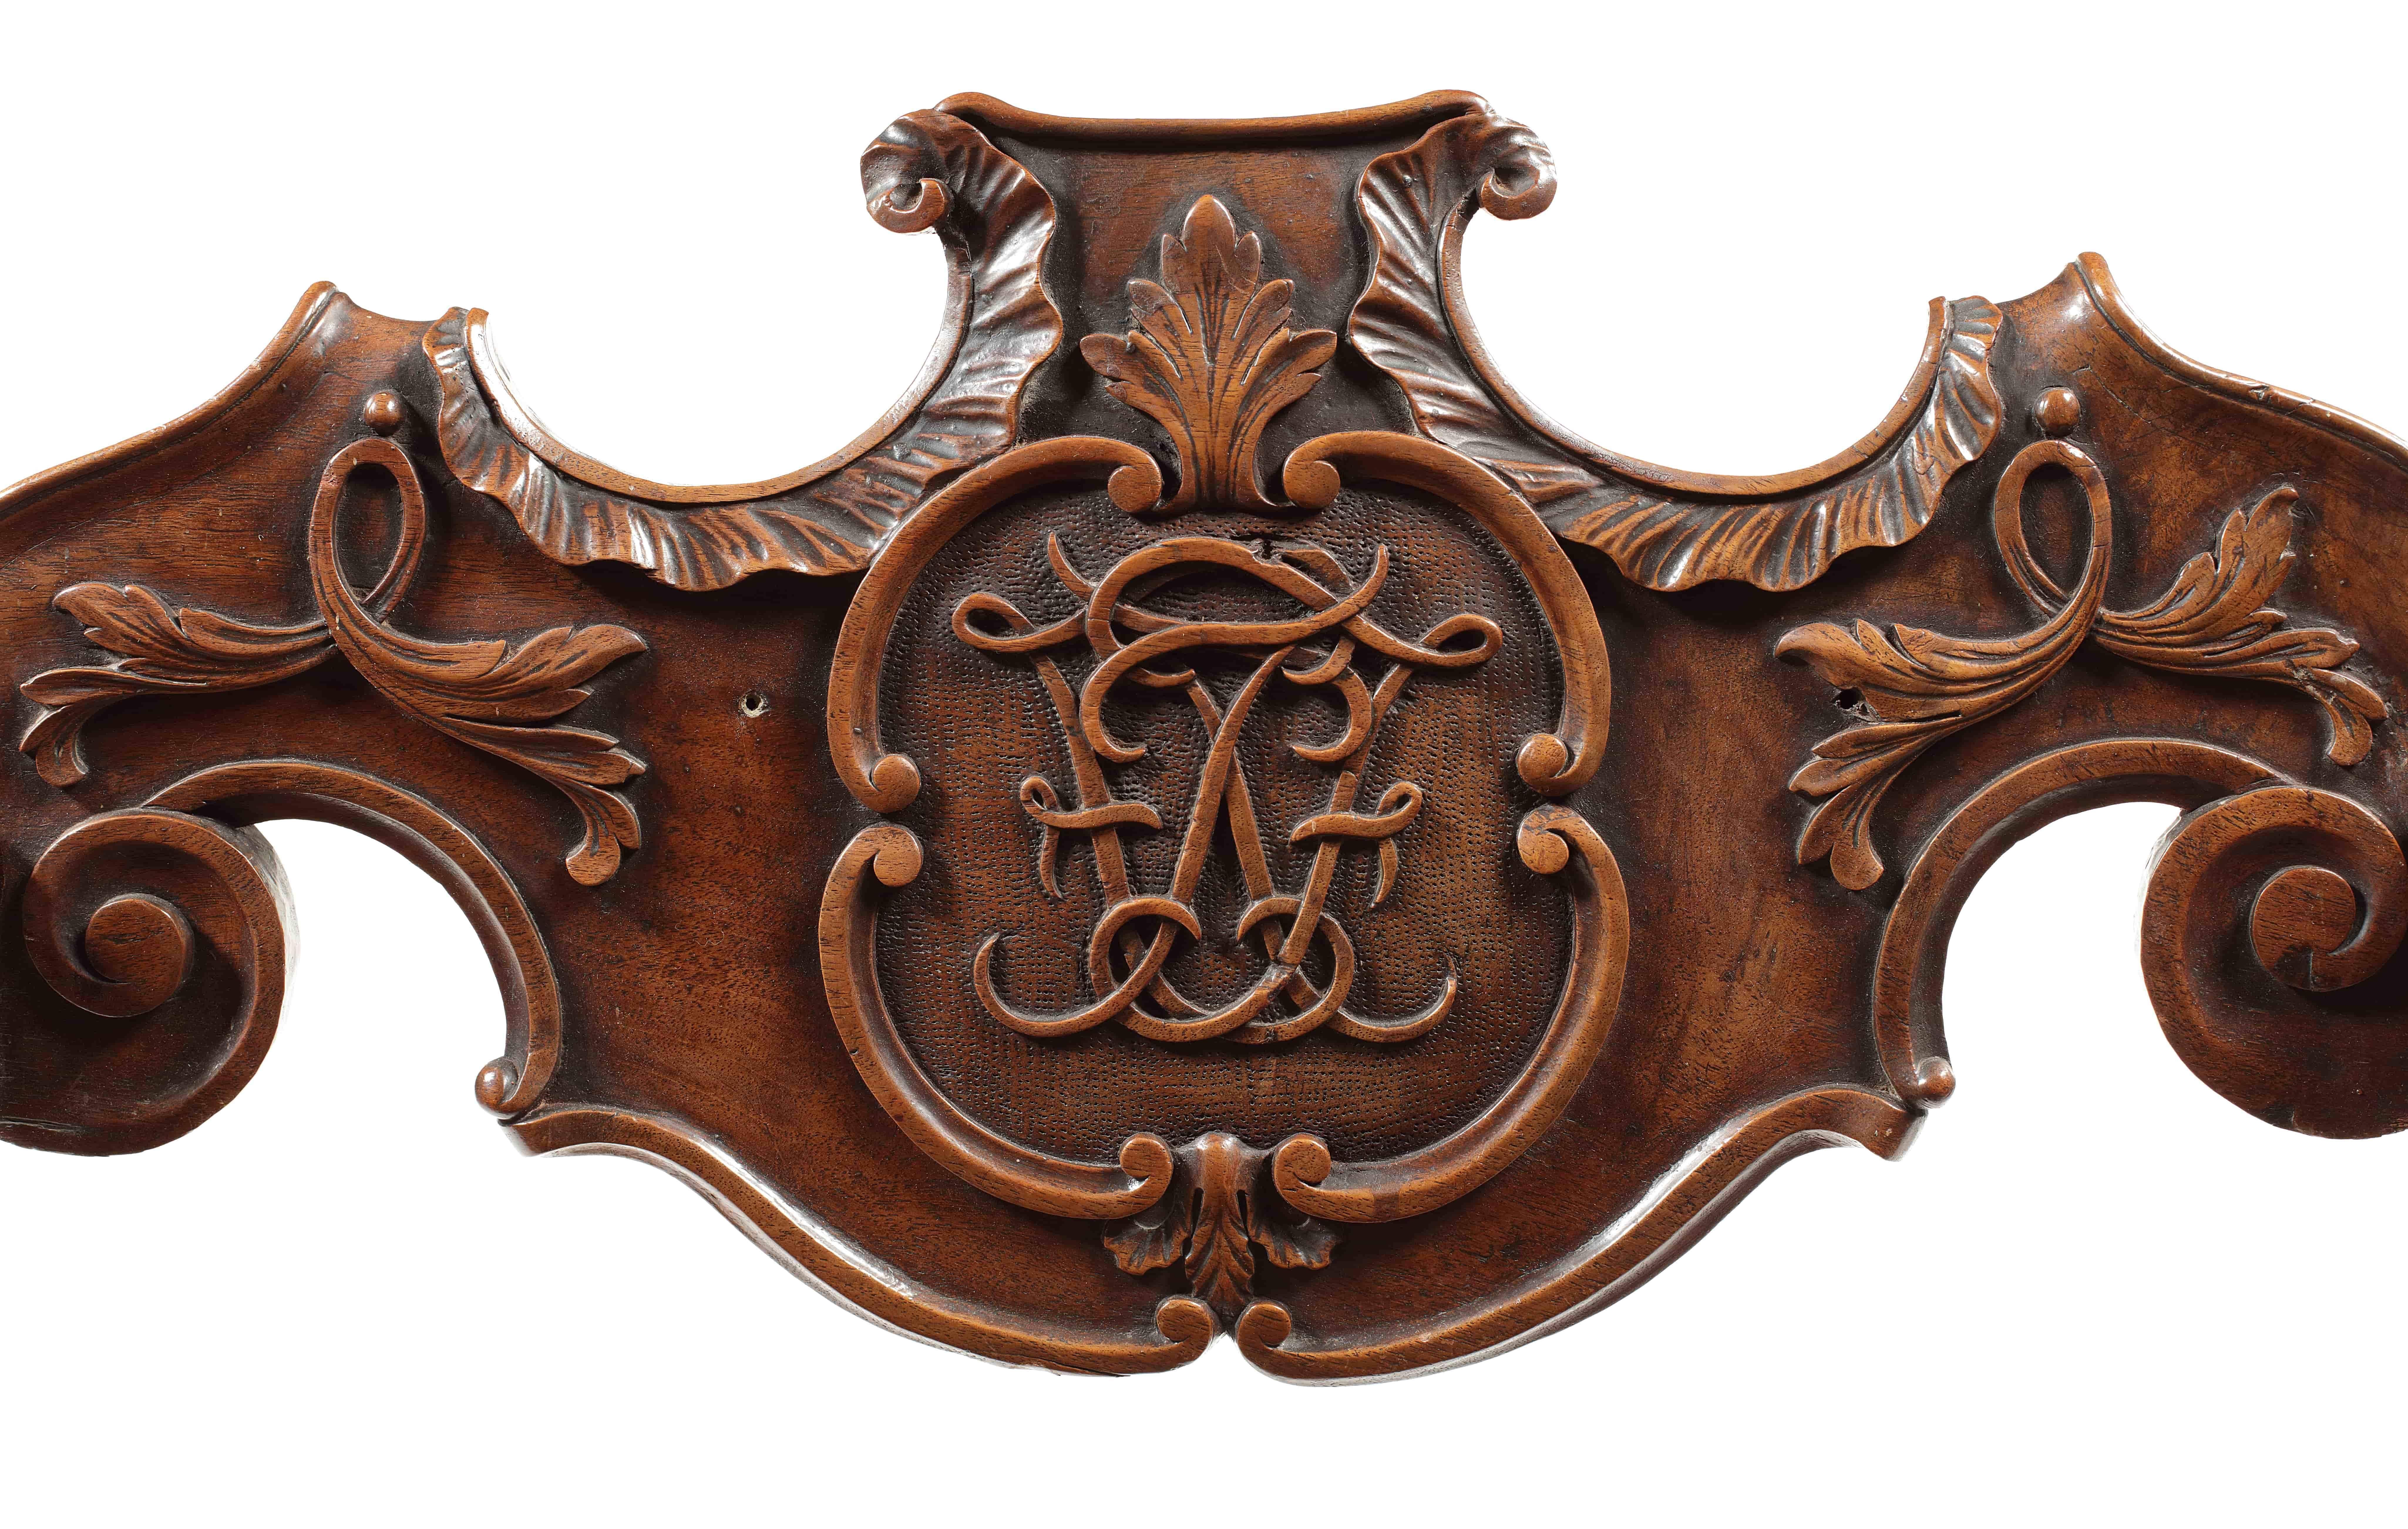 The shaped acanthus carved scrolling panelled back with central cypher monogram with a 'C' scroll border, the scroll arms with slatted sides and seat joined by a turned roundel on 'X' form legs carved to the front with acanthus leaves on scrolling